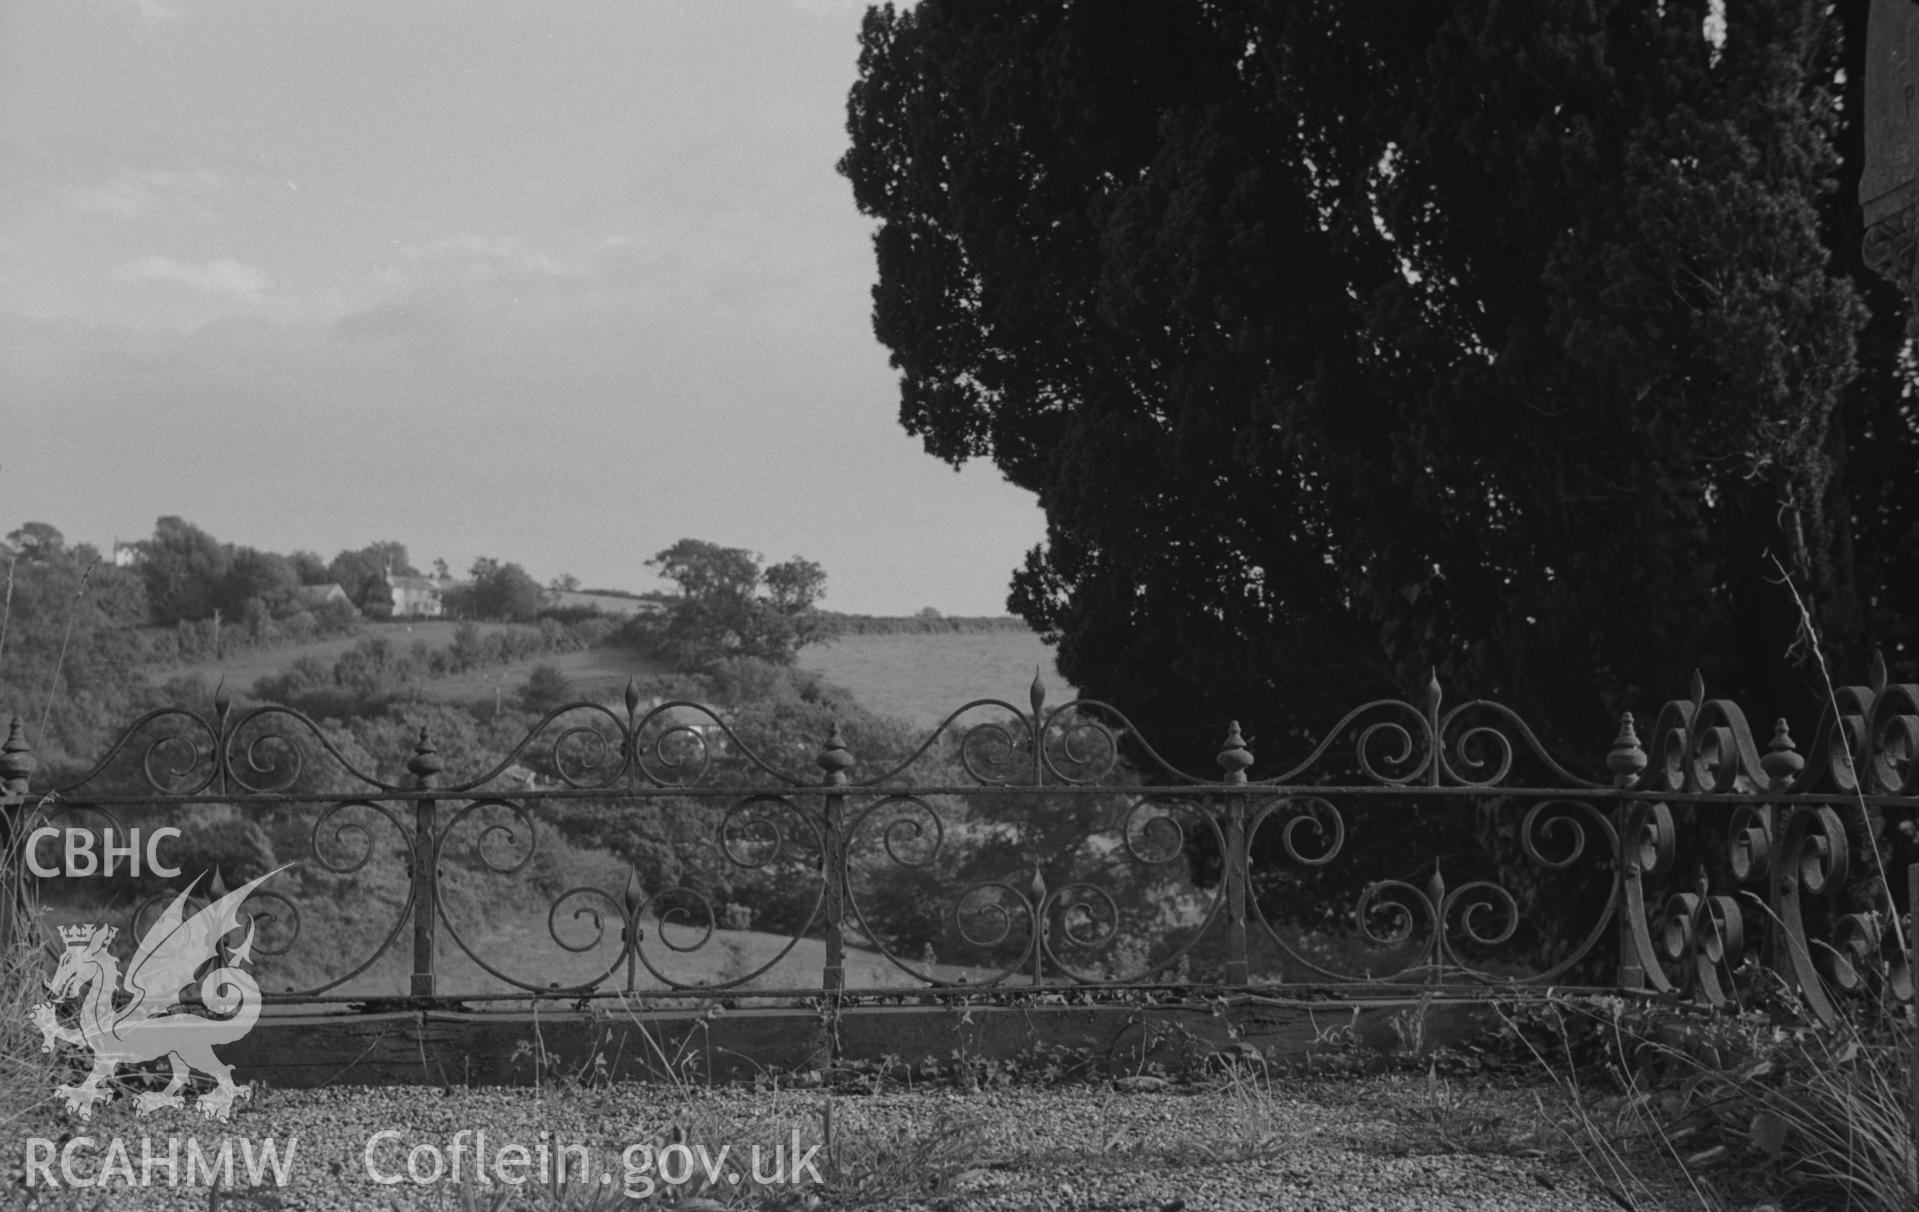 Digital copy of a black and white negative showing wrought iron work around a grave enclosure in graveyard at St. Tygwydd's church, Llandygwydd, Cardigan. Photographed by Arthur O. Chater in September 1966 looking south from Grid Reference SN 242 438.